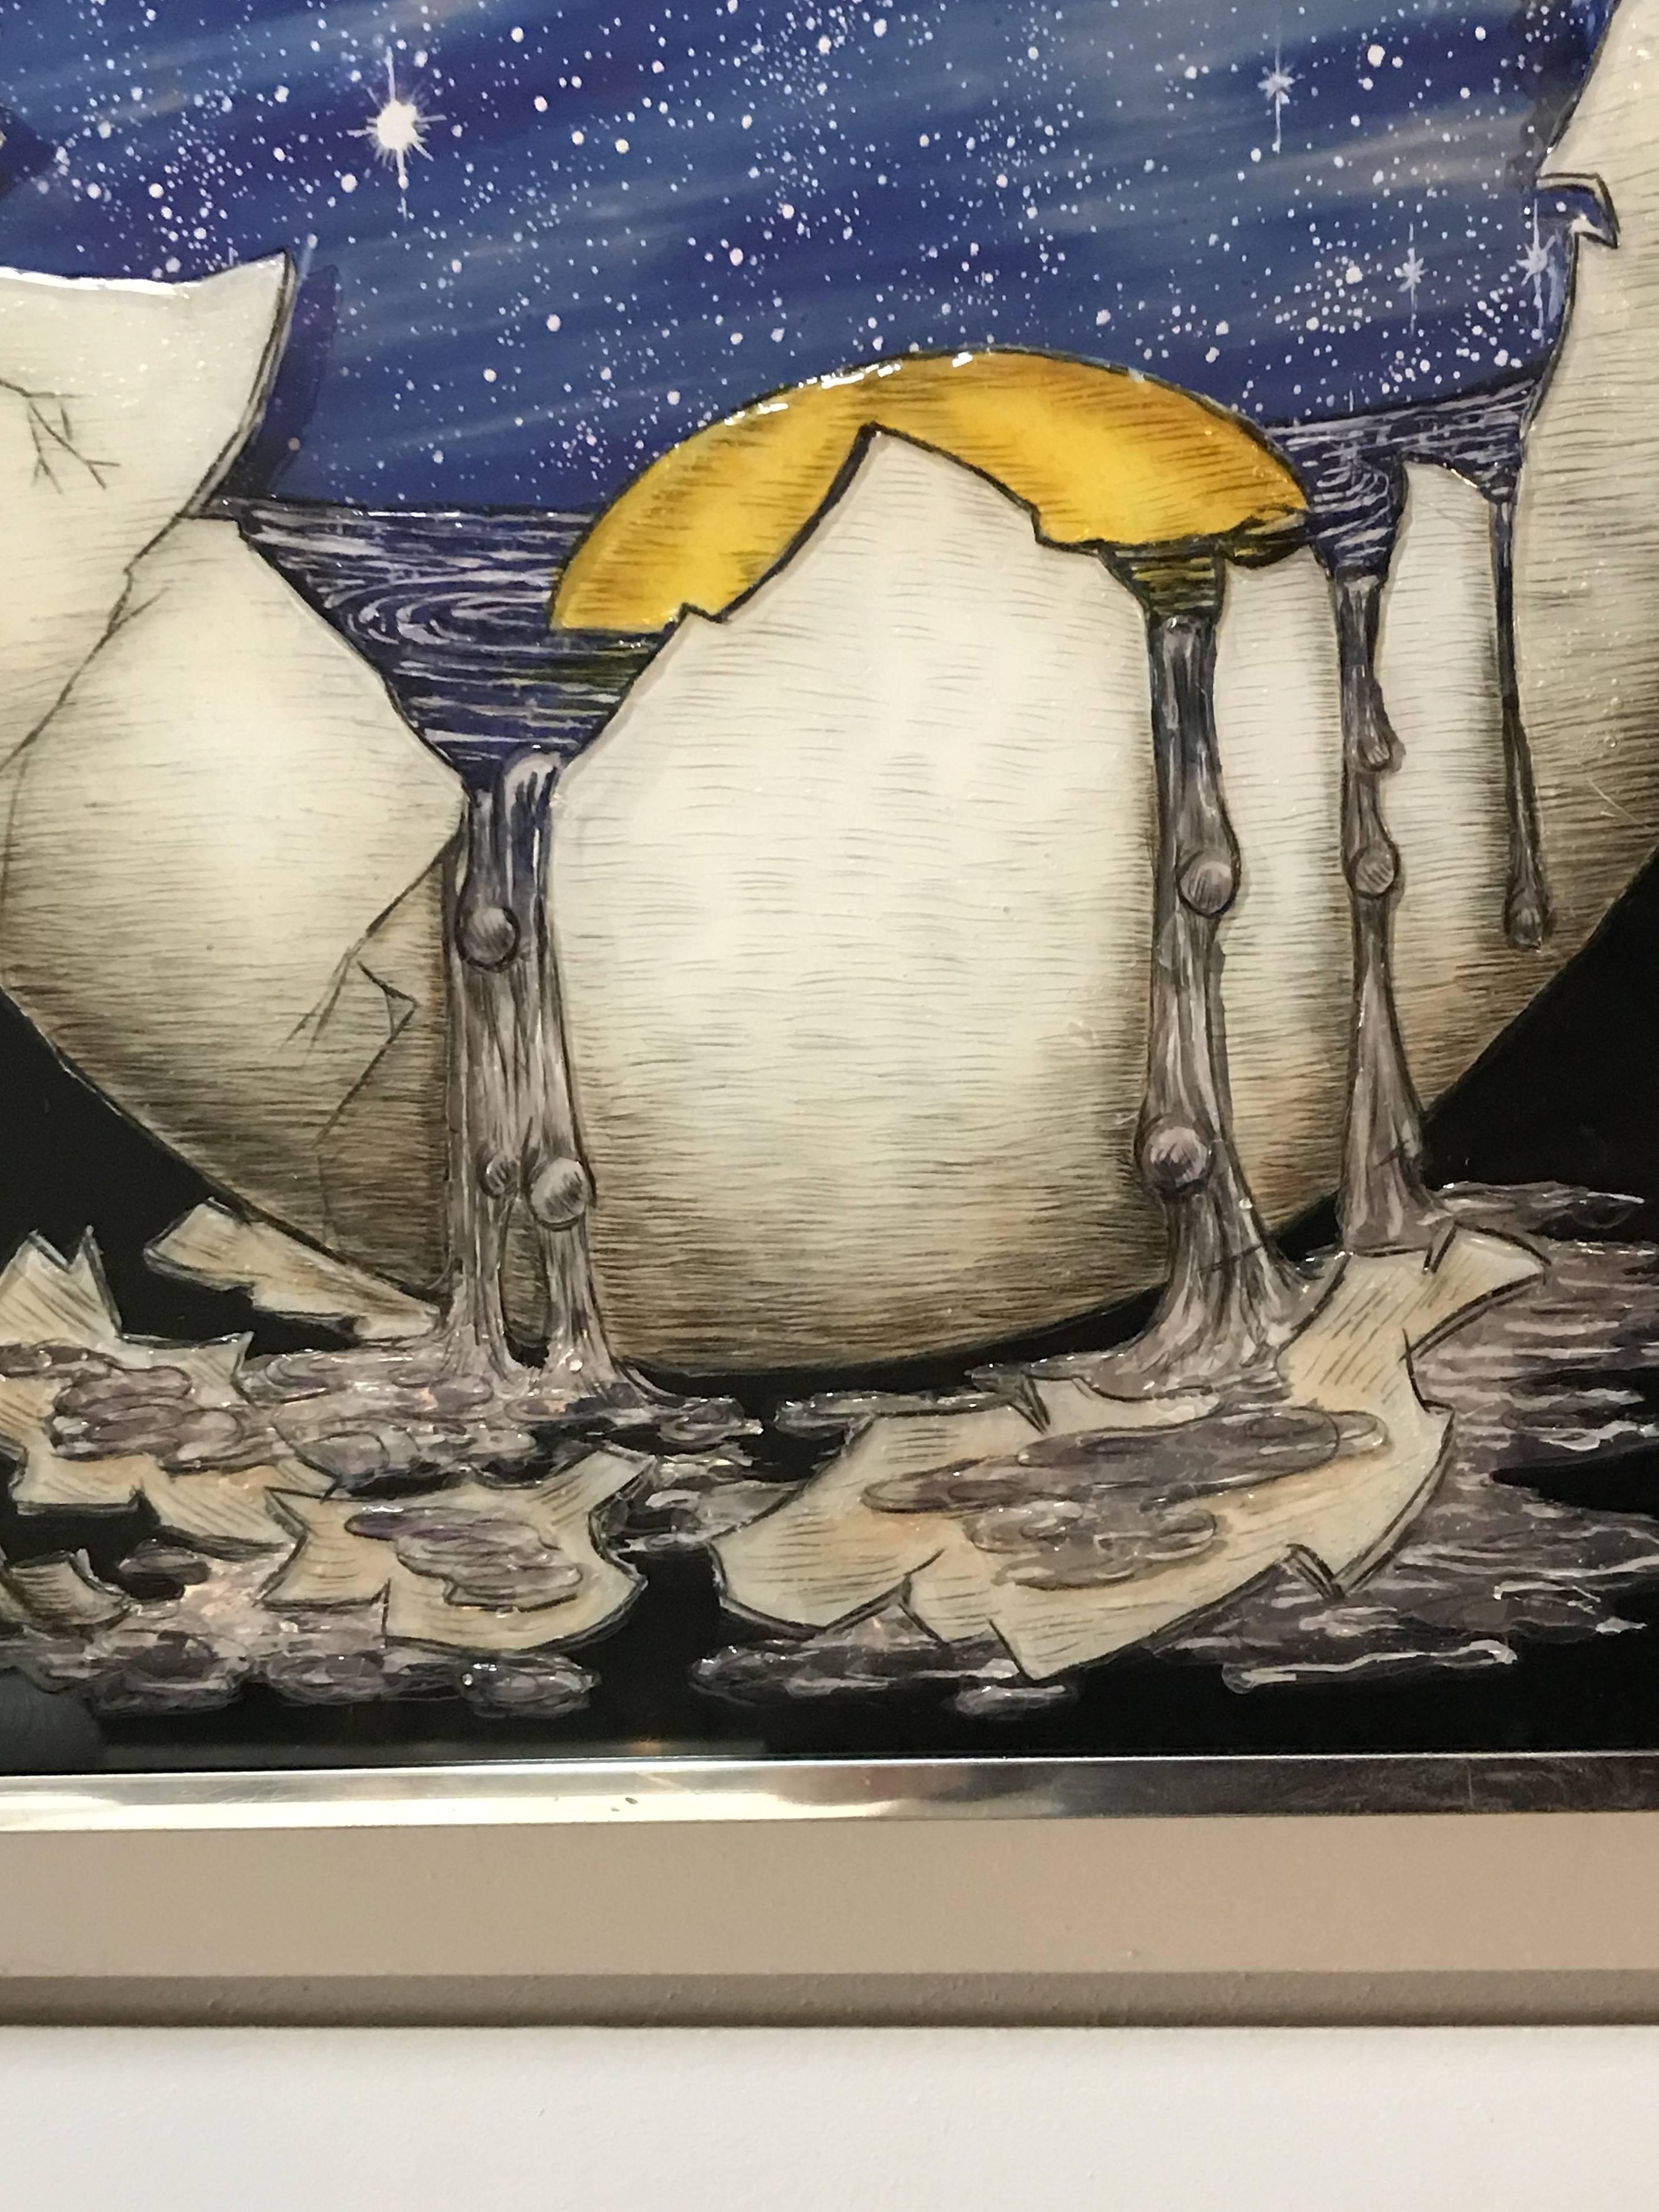 Mid-Century Modern Dimensional Artwork of an Egg Holding a Universe by Geiger